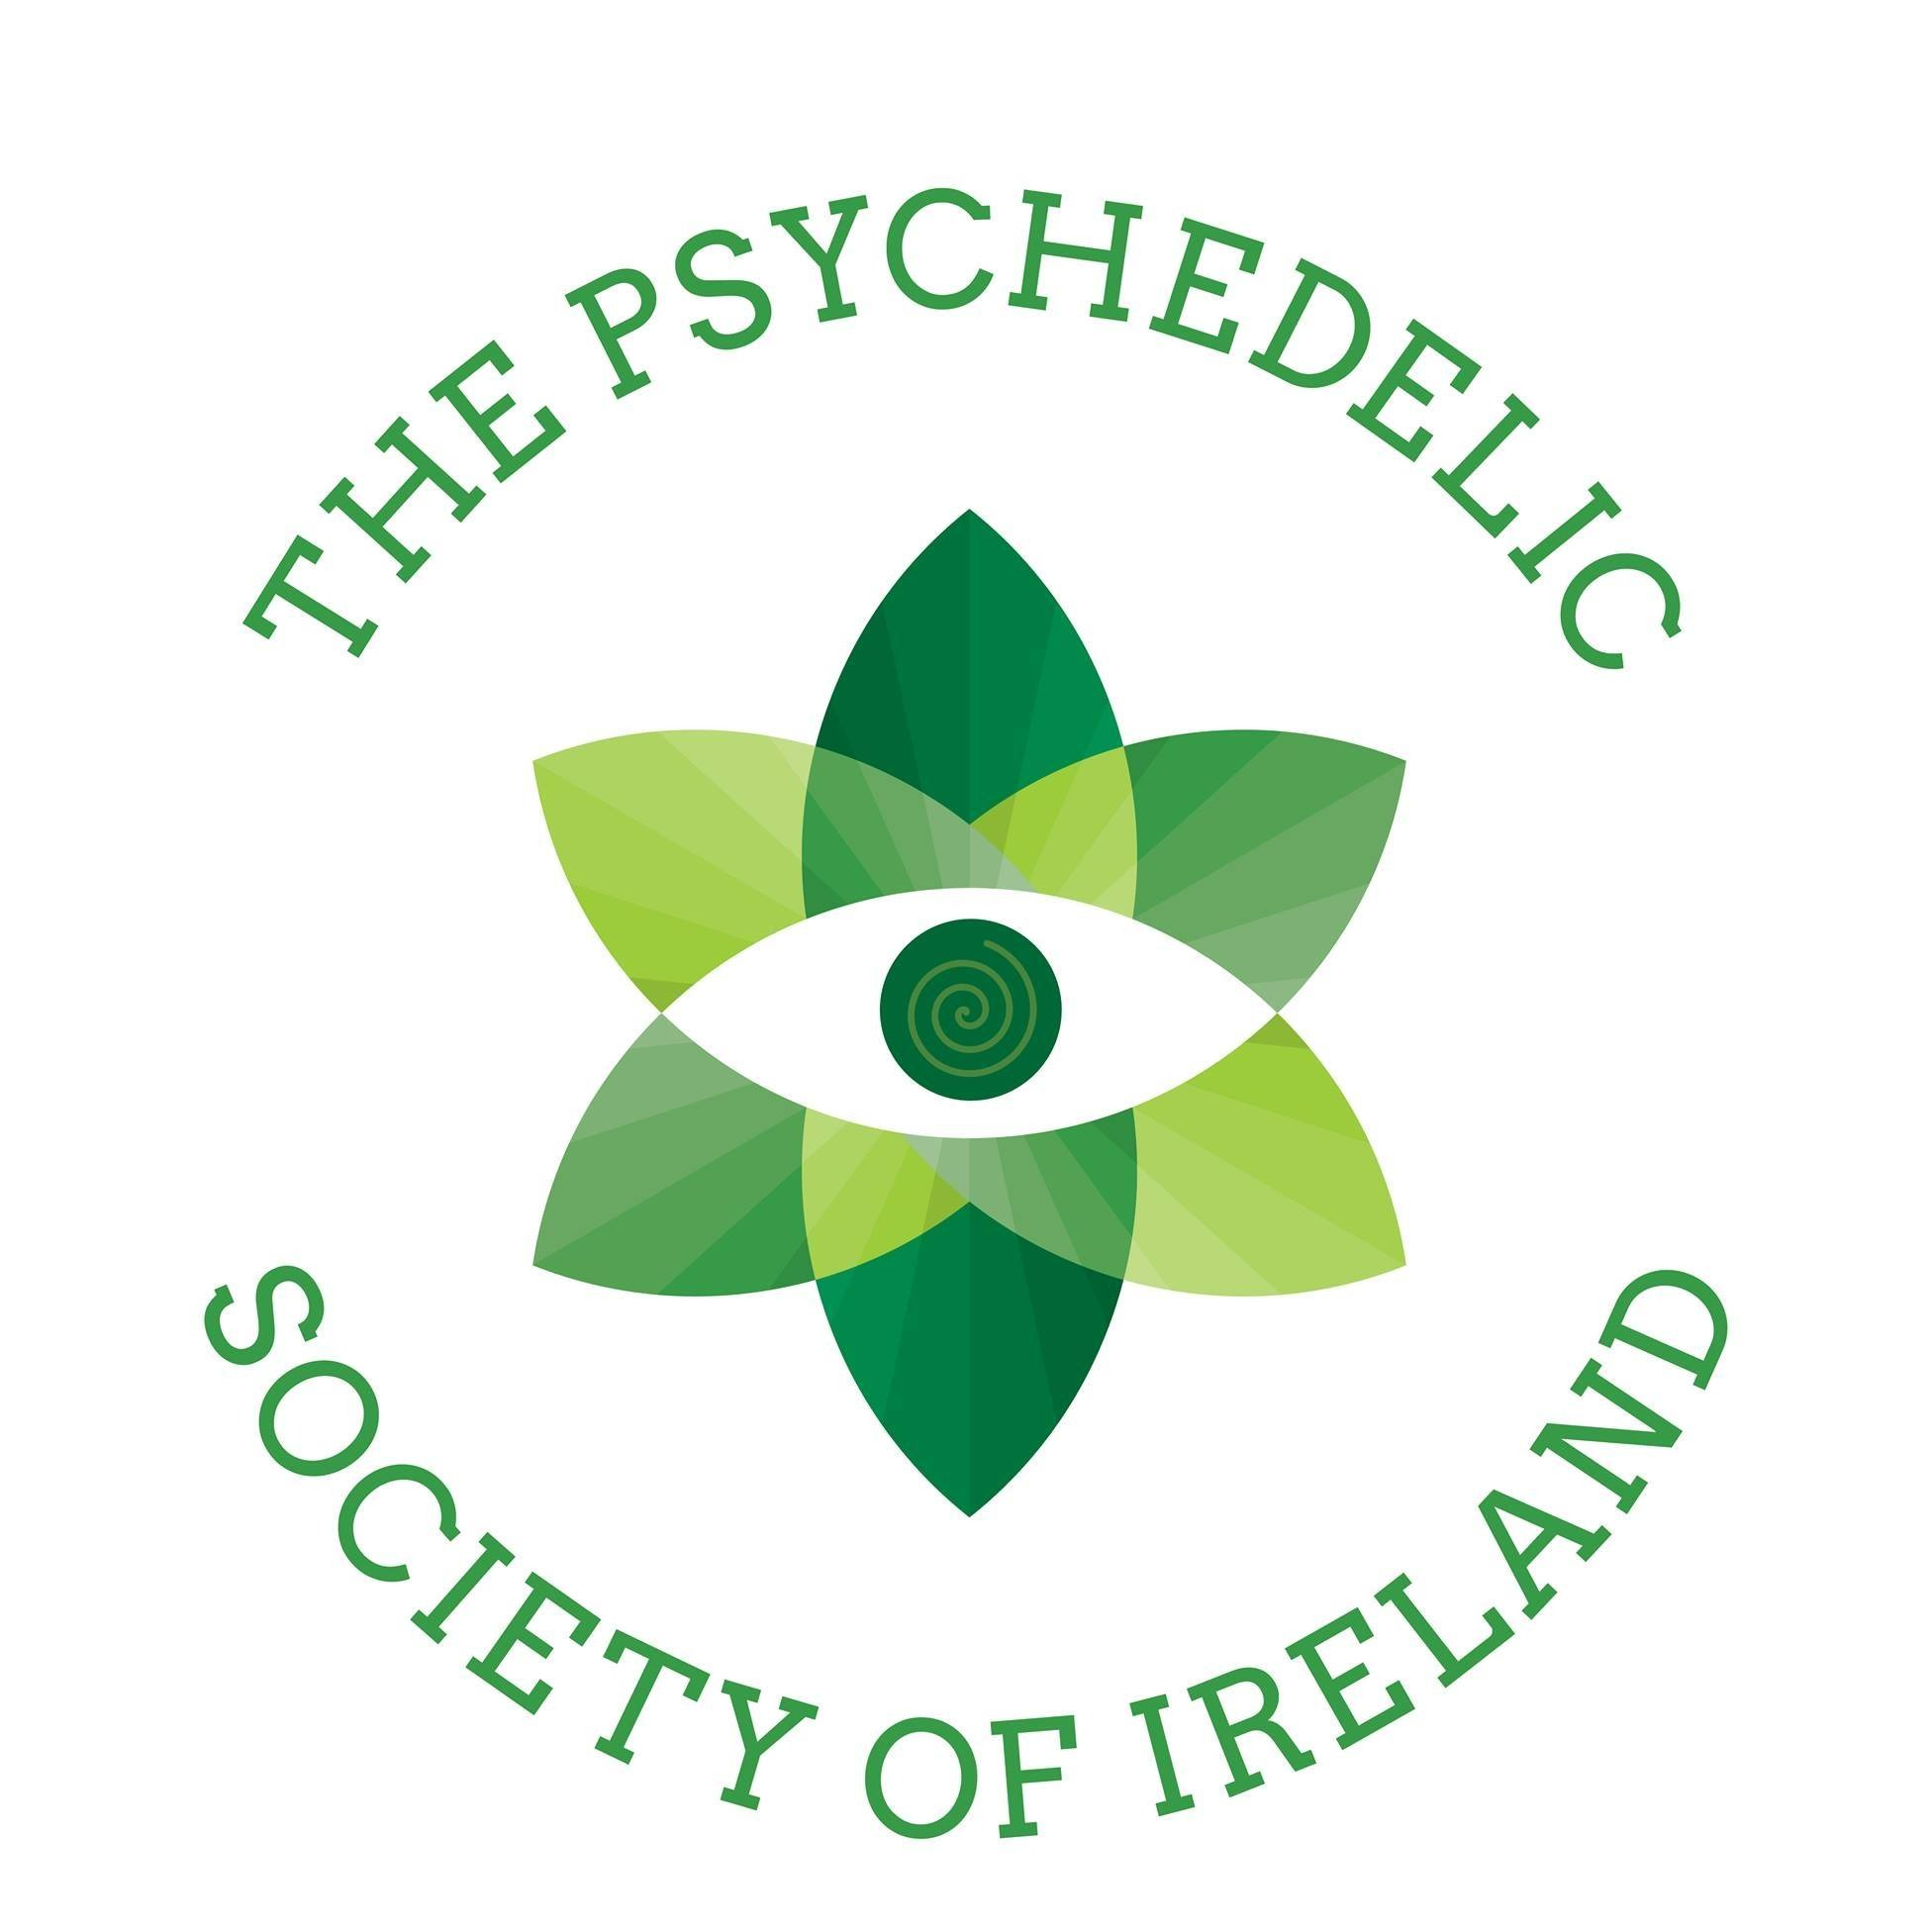 The Psychedelic Society of Ireland